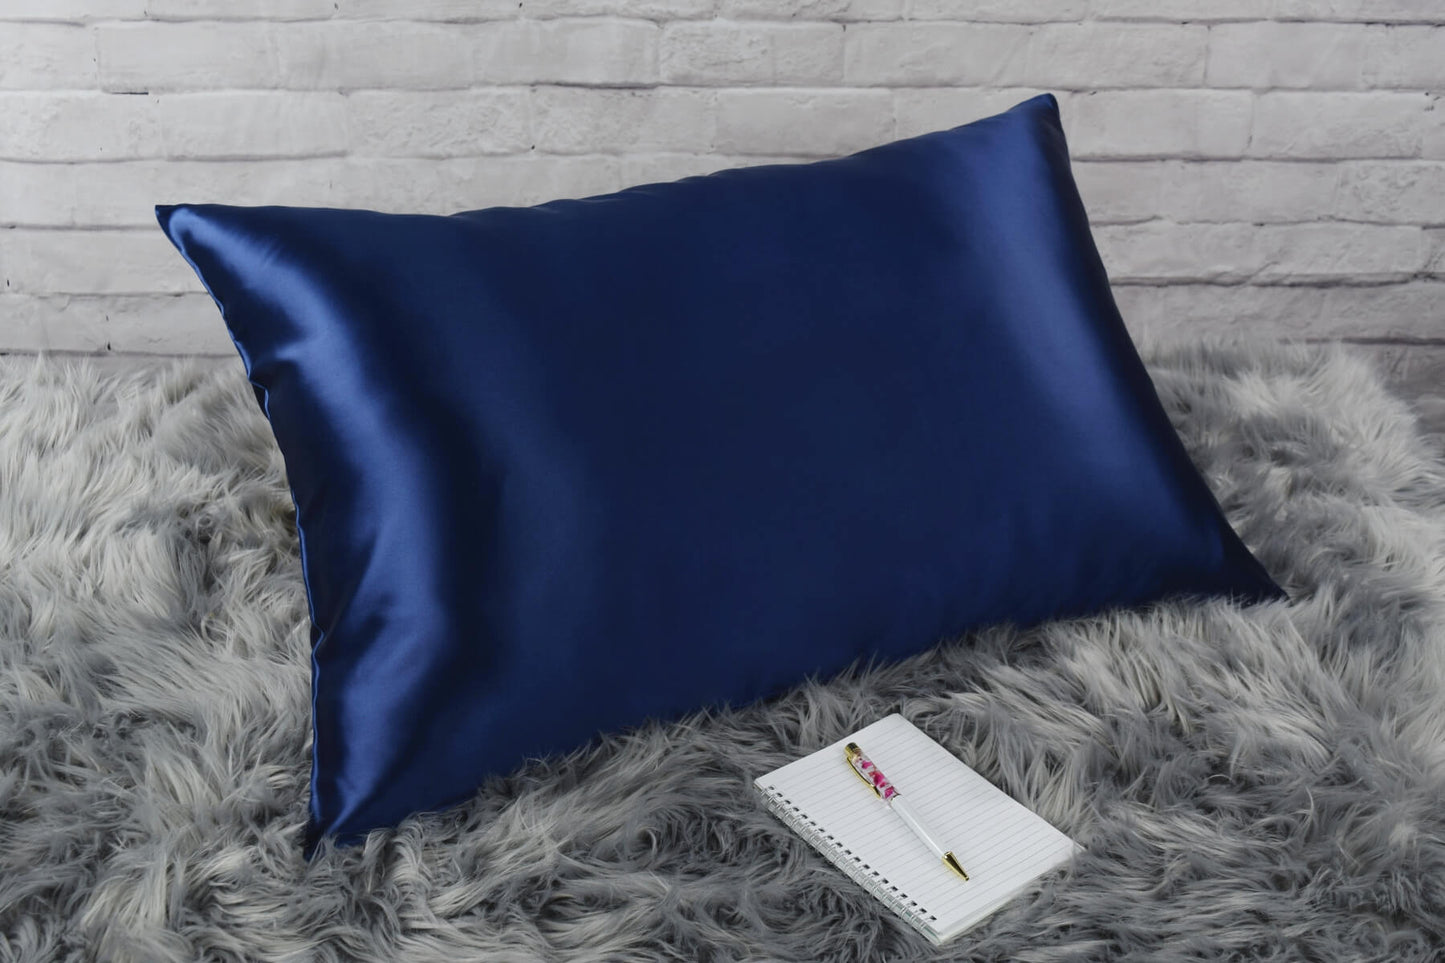 Celestial Silk Navy blue 25 momme Silk Pillowcase on rug with notebook and pretty pen